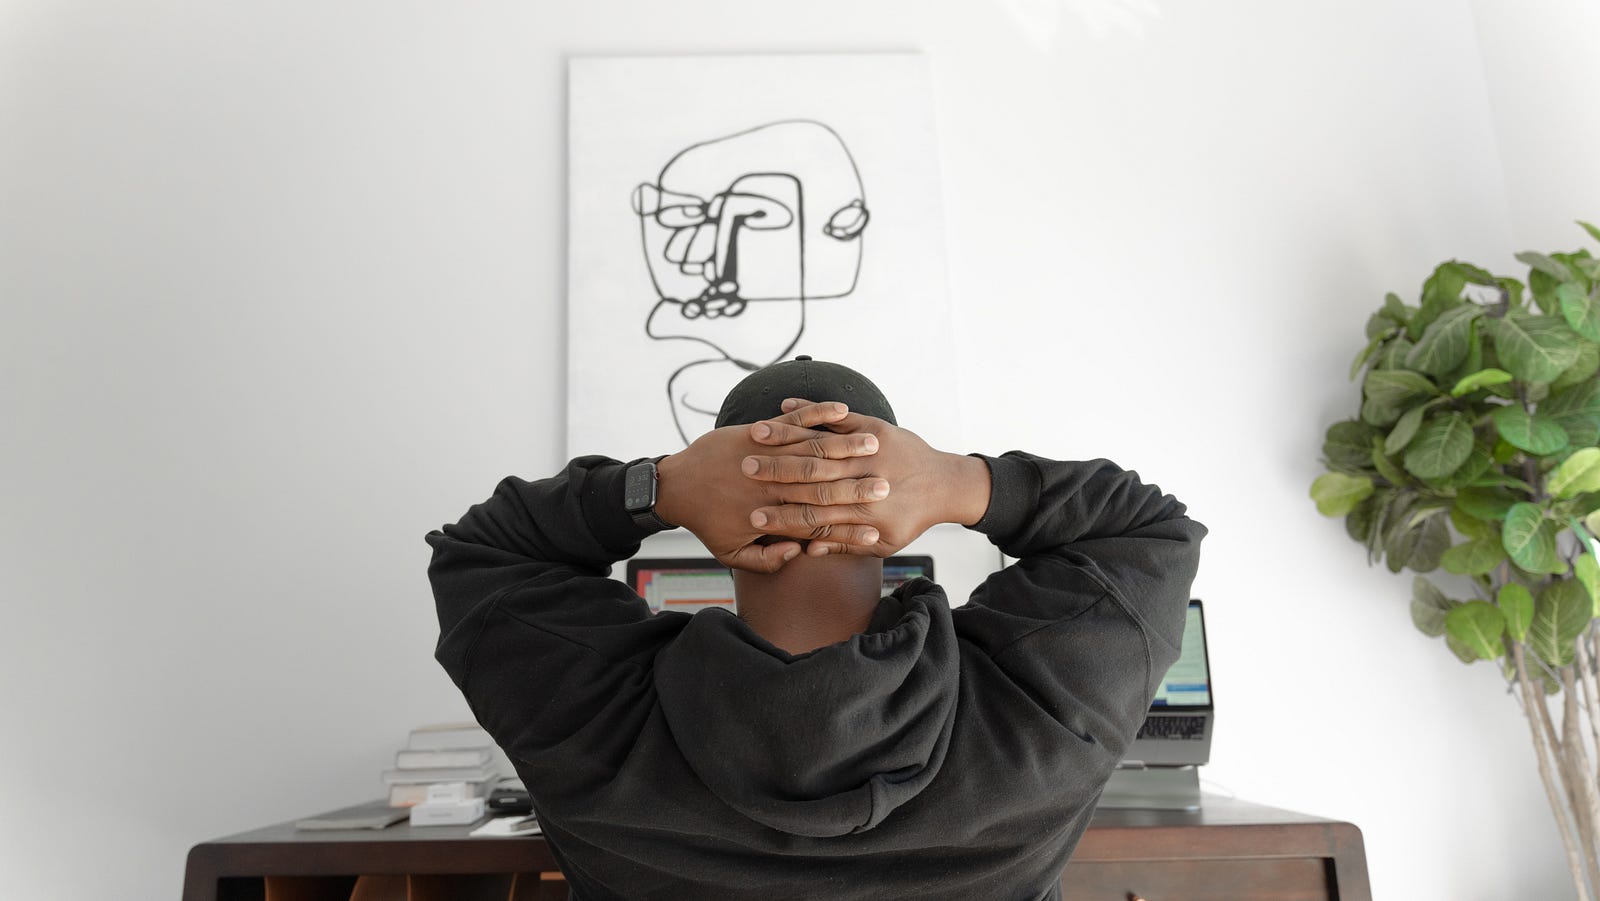 A man sits, hands behind his head, at a desk. He is focused on an abstract drawing of a head on the wall. Total sedentary time is detrimentally linked with triglycerides, waist circumference, two-hour glucose, and insulin levels.